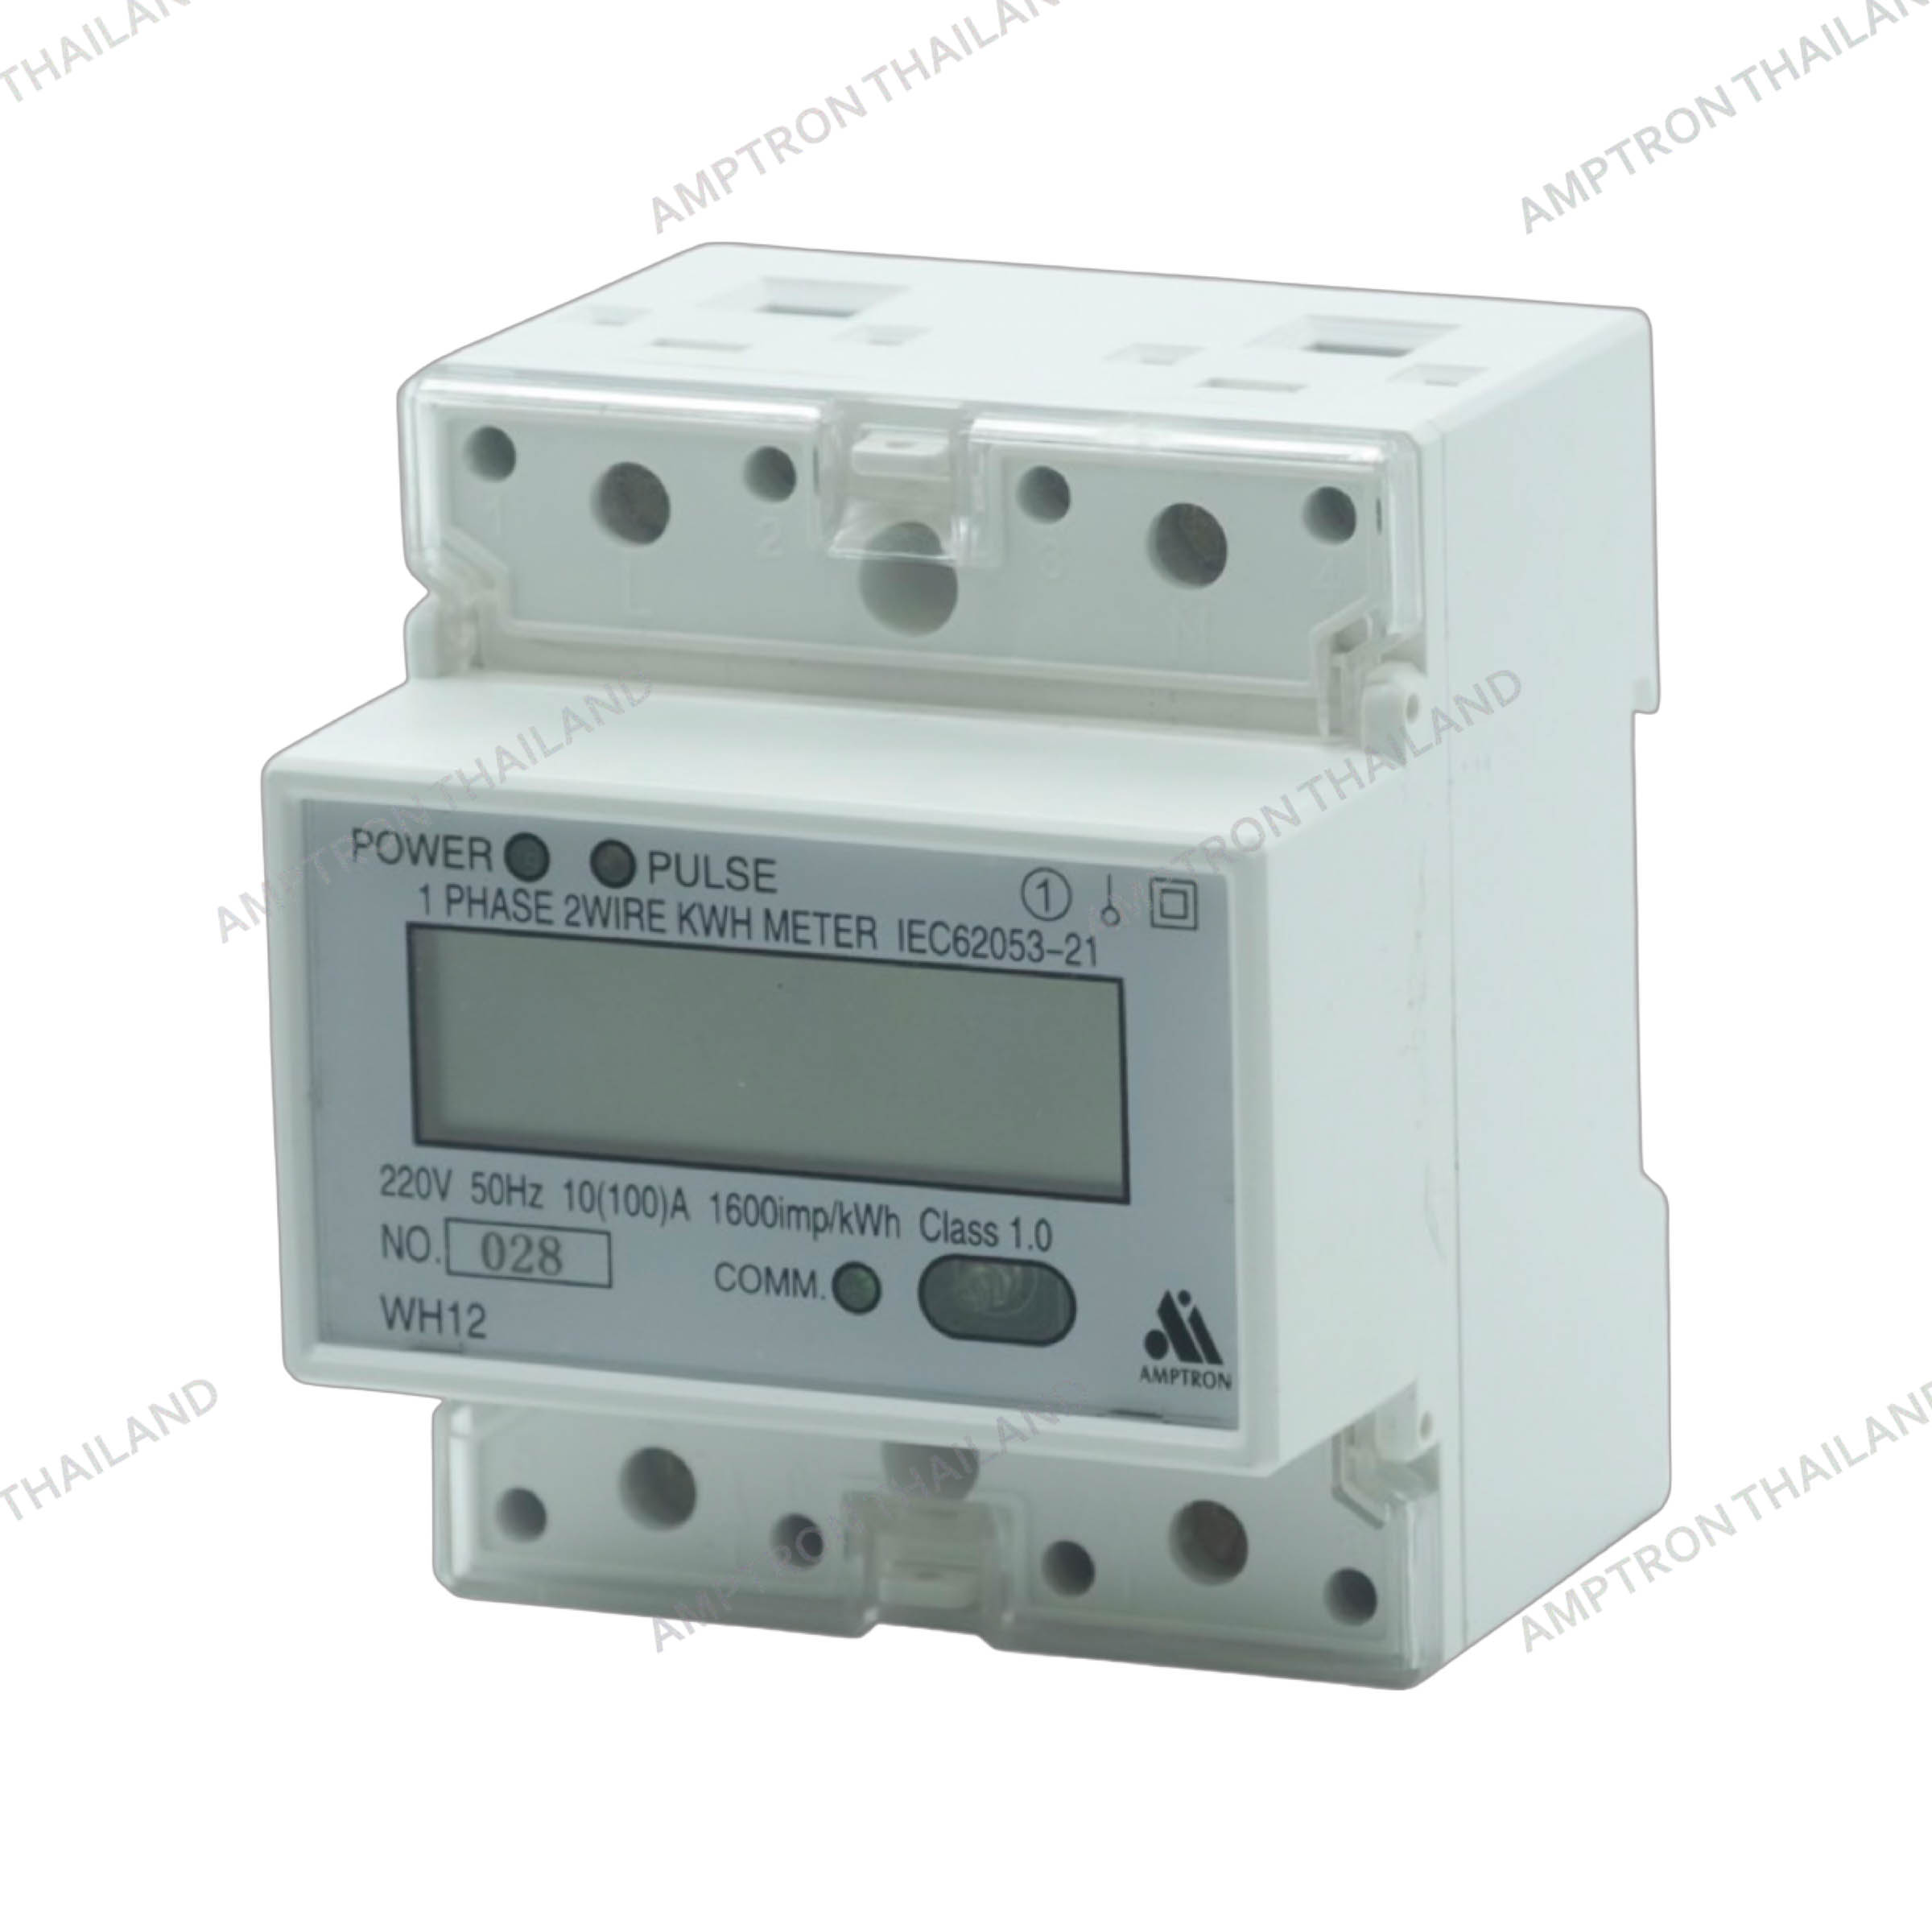 WH12 1Phase 2Wire Kwh Meter